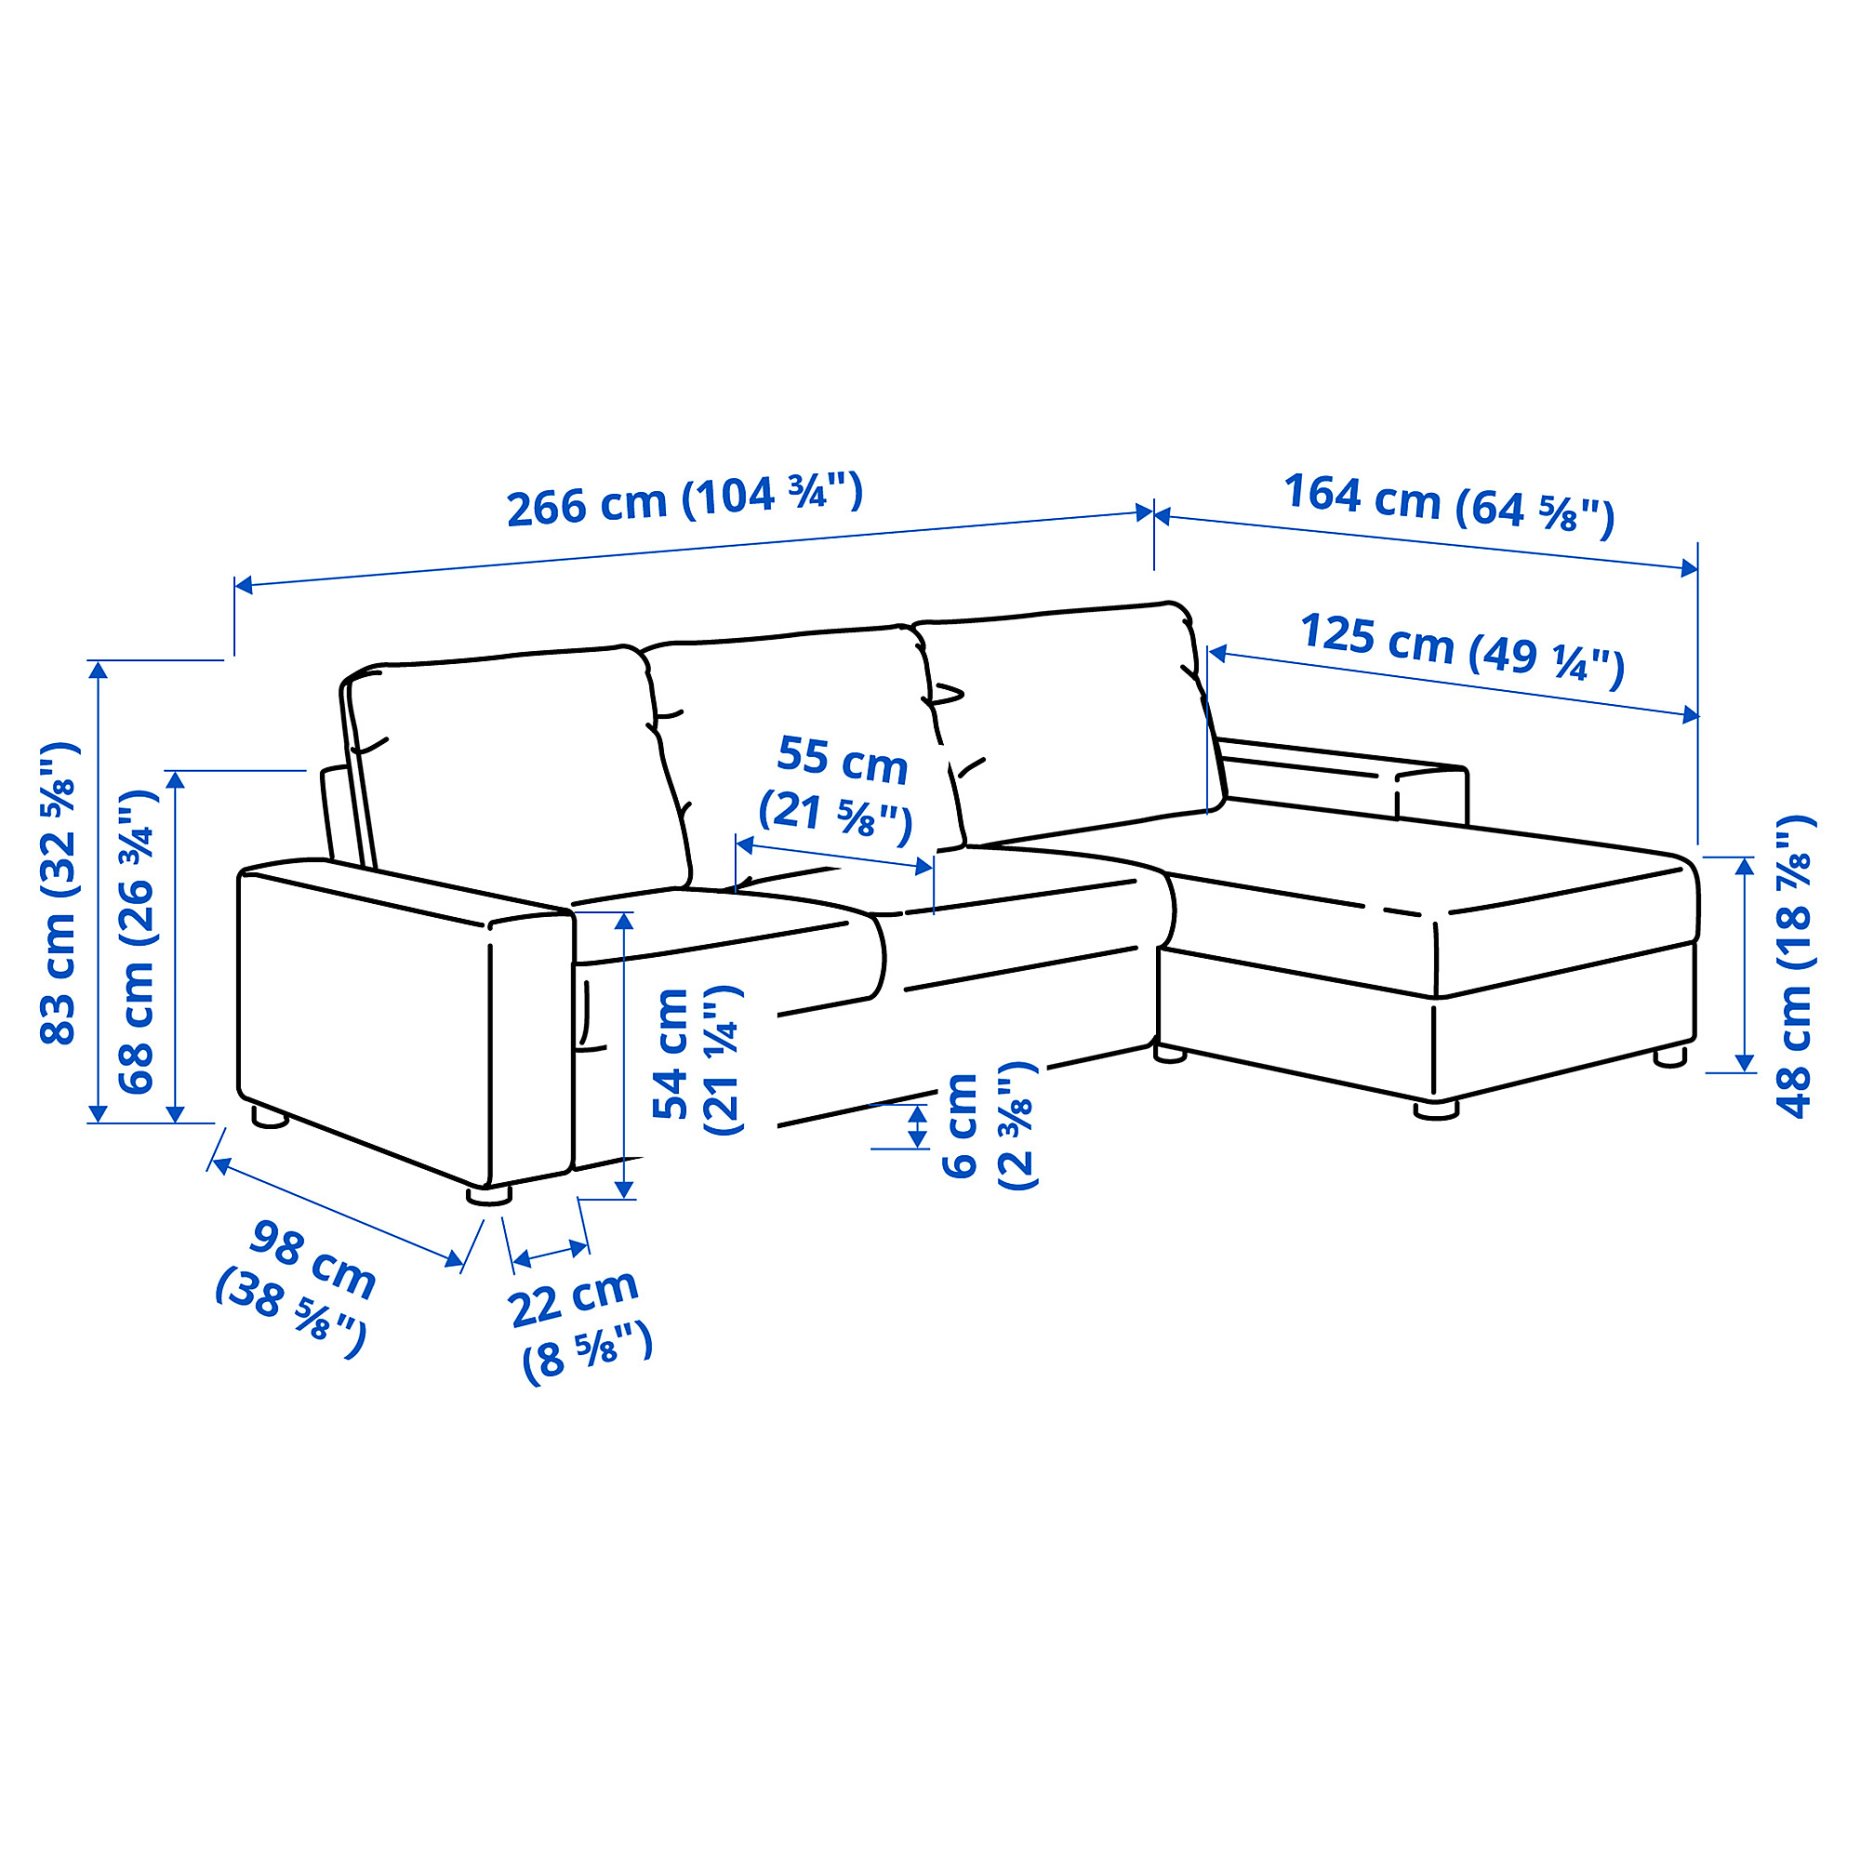 VIMLE, 3-seat sofa with chaise longue with wide armrests, 294.014.22